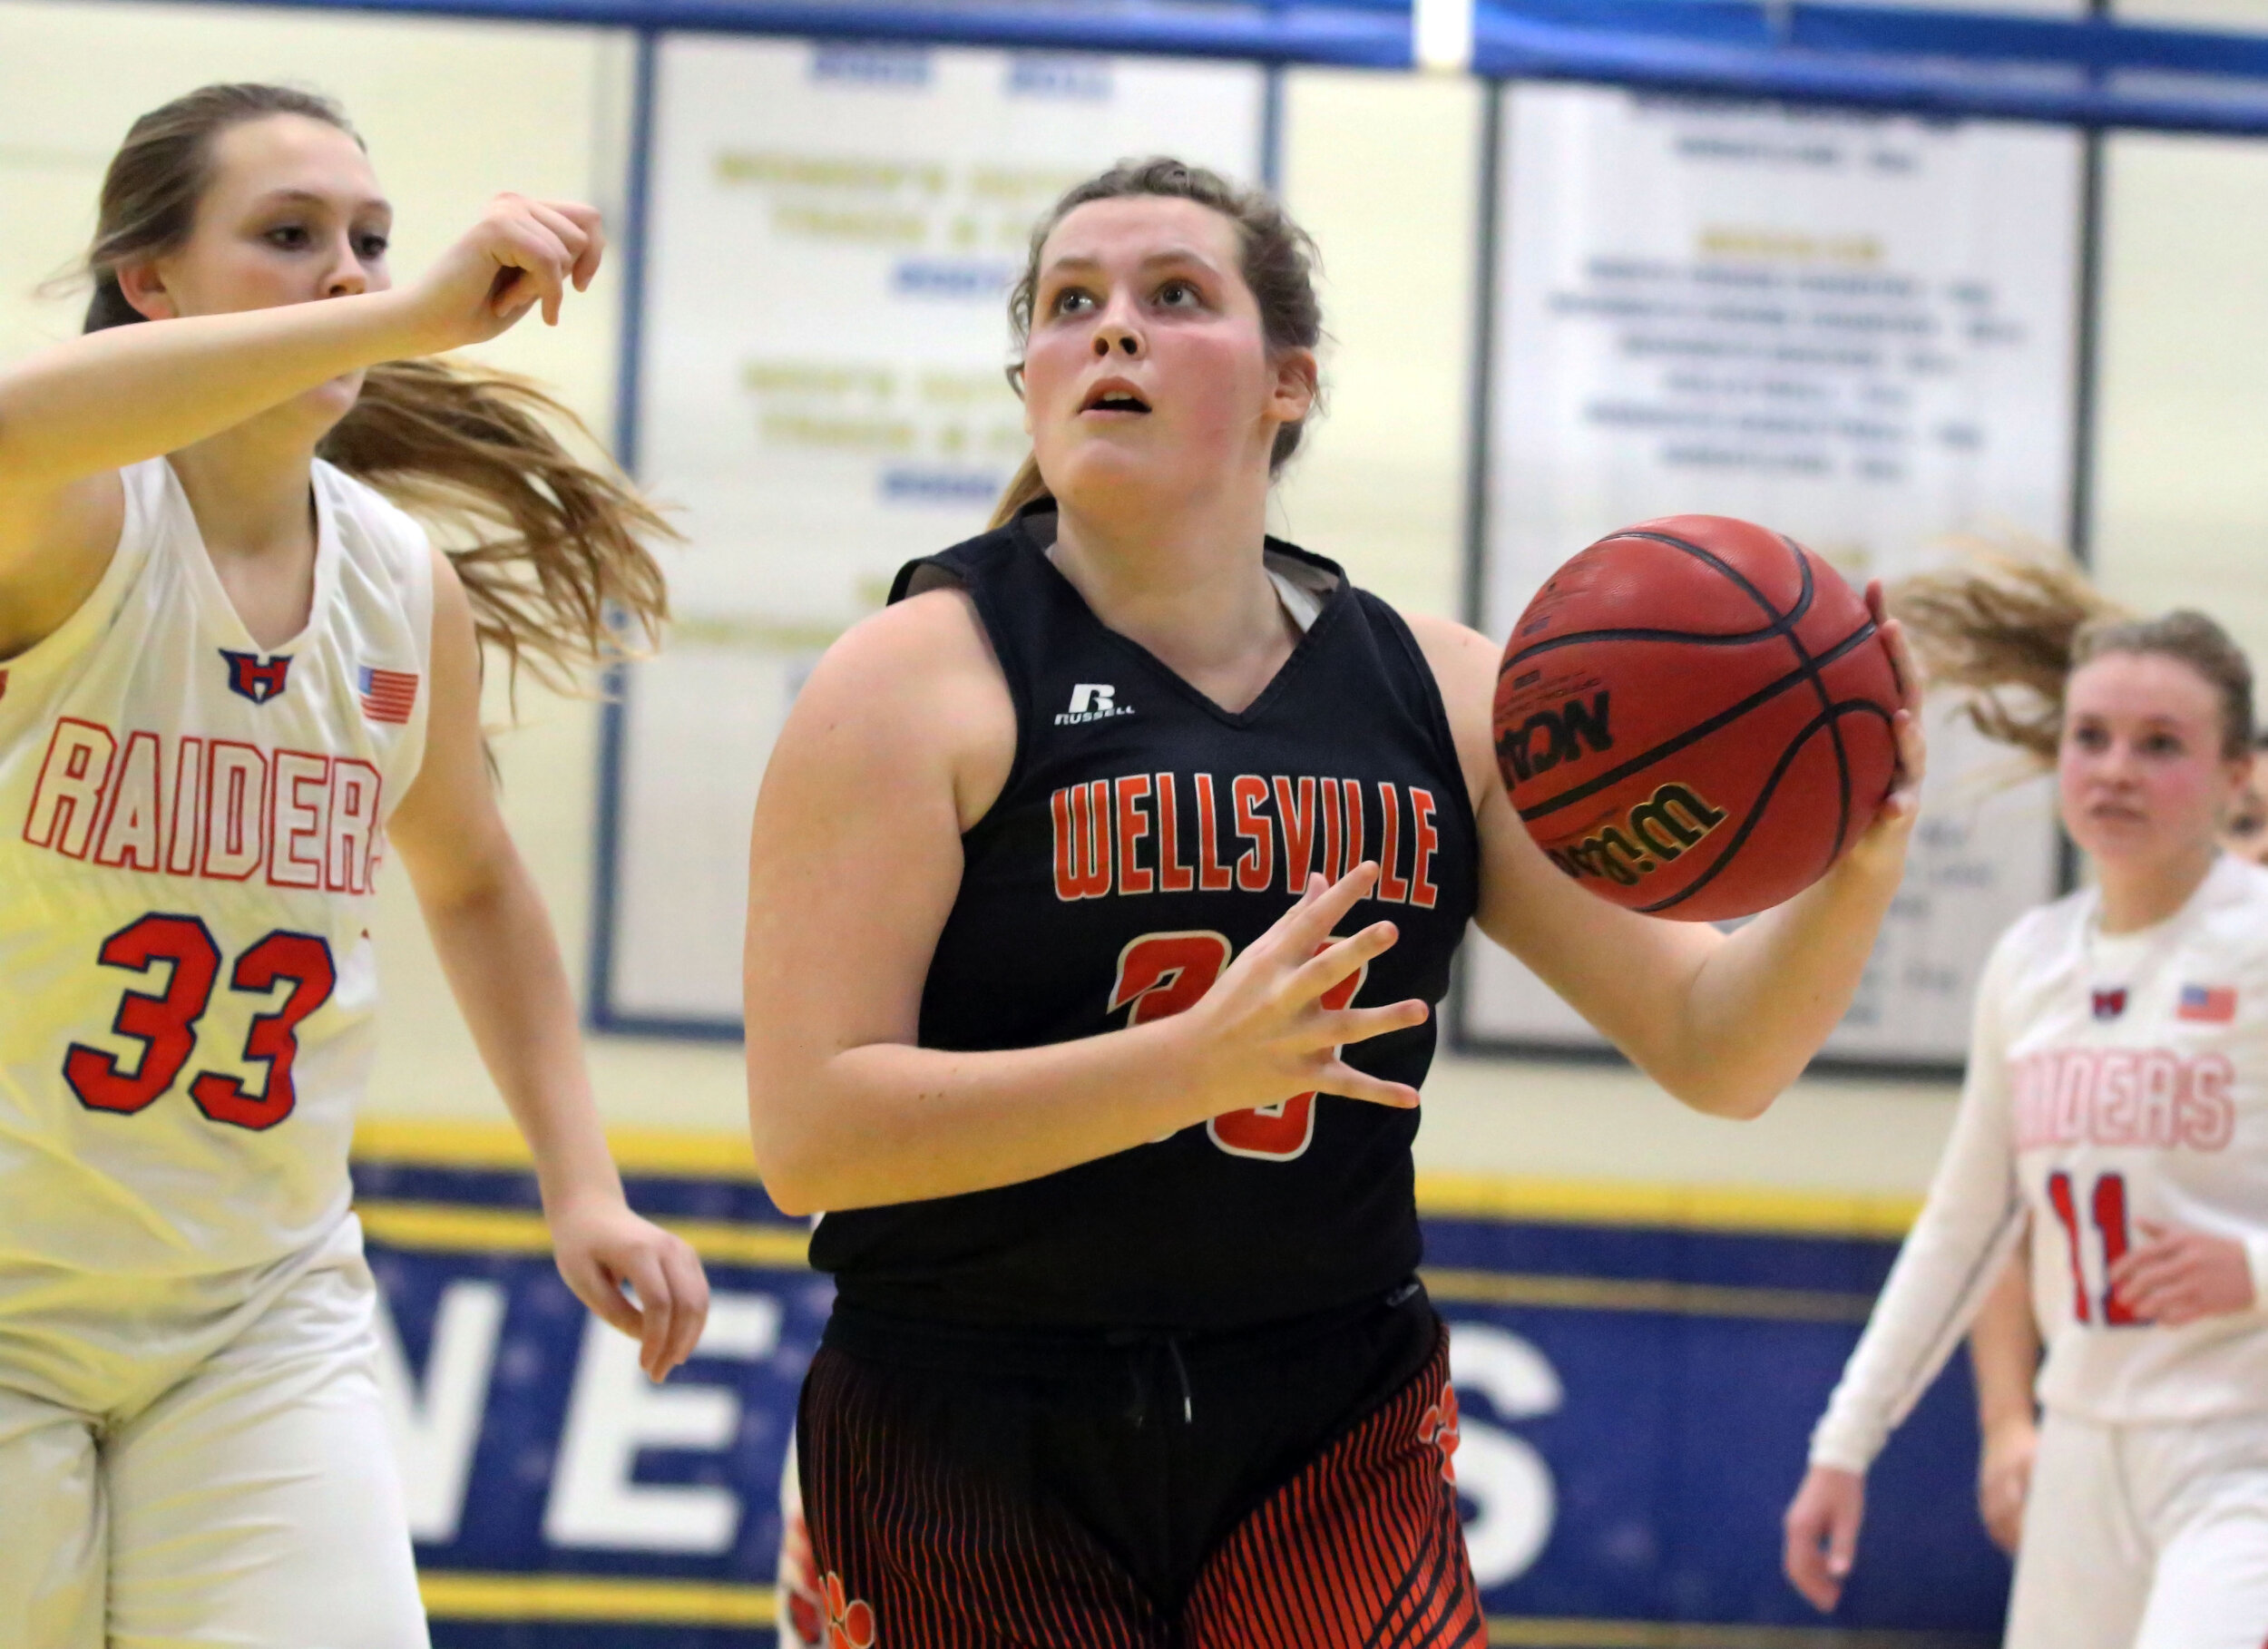  Wellsville senior Regan Marsh, middle, drives her way to the basket as the Hornell defense defends alongside during Friday night’s clash at the Barkley Showcase at Alfred State College. [Chris Brooks/WellsvilleSports.com] 